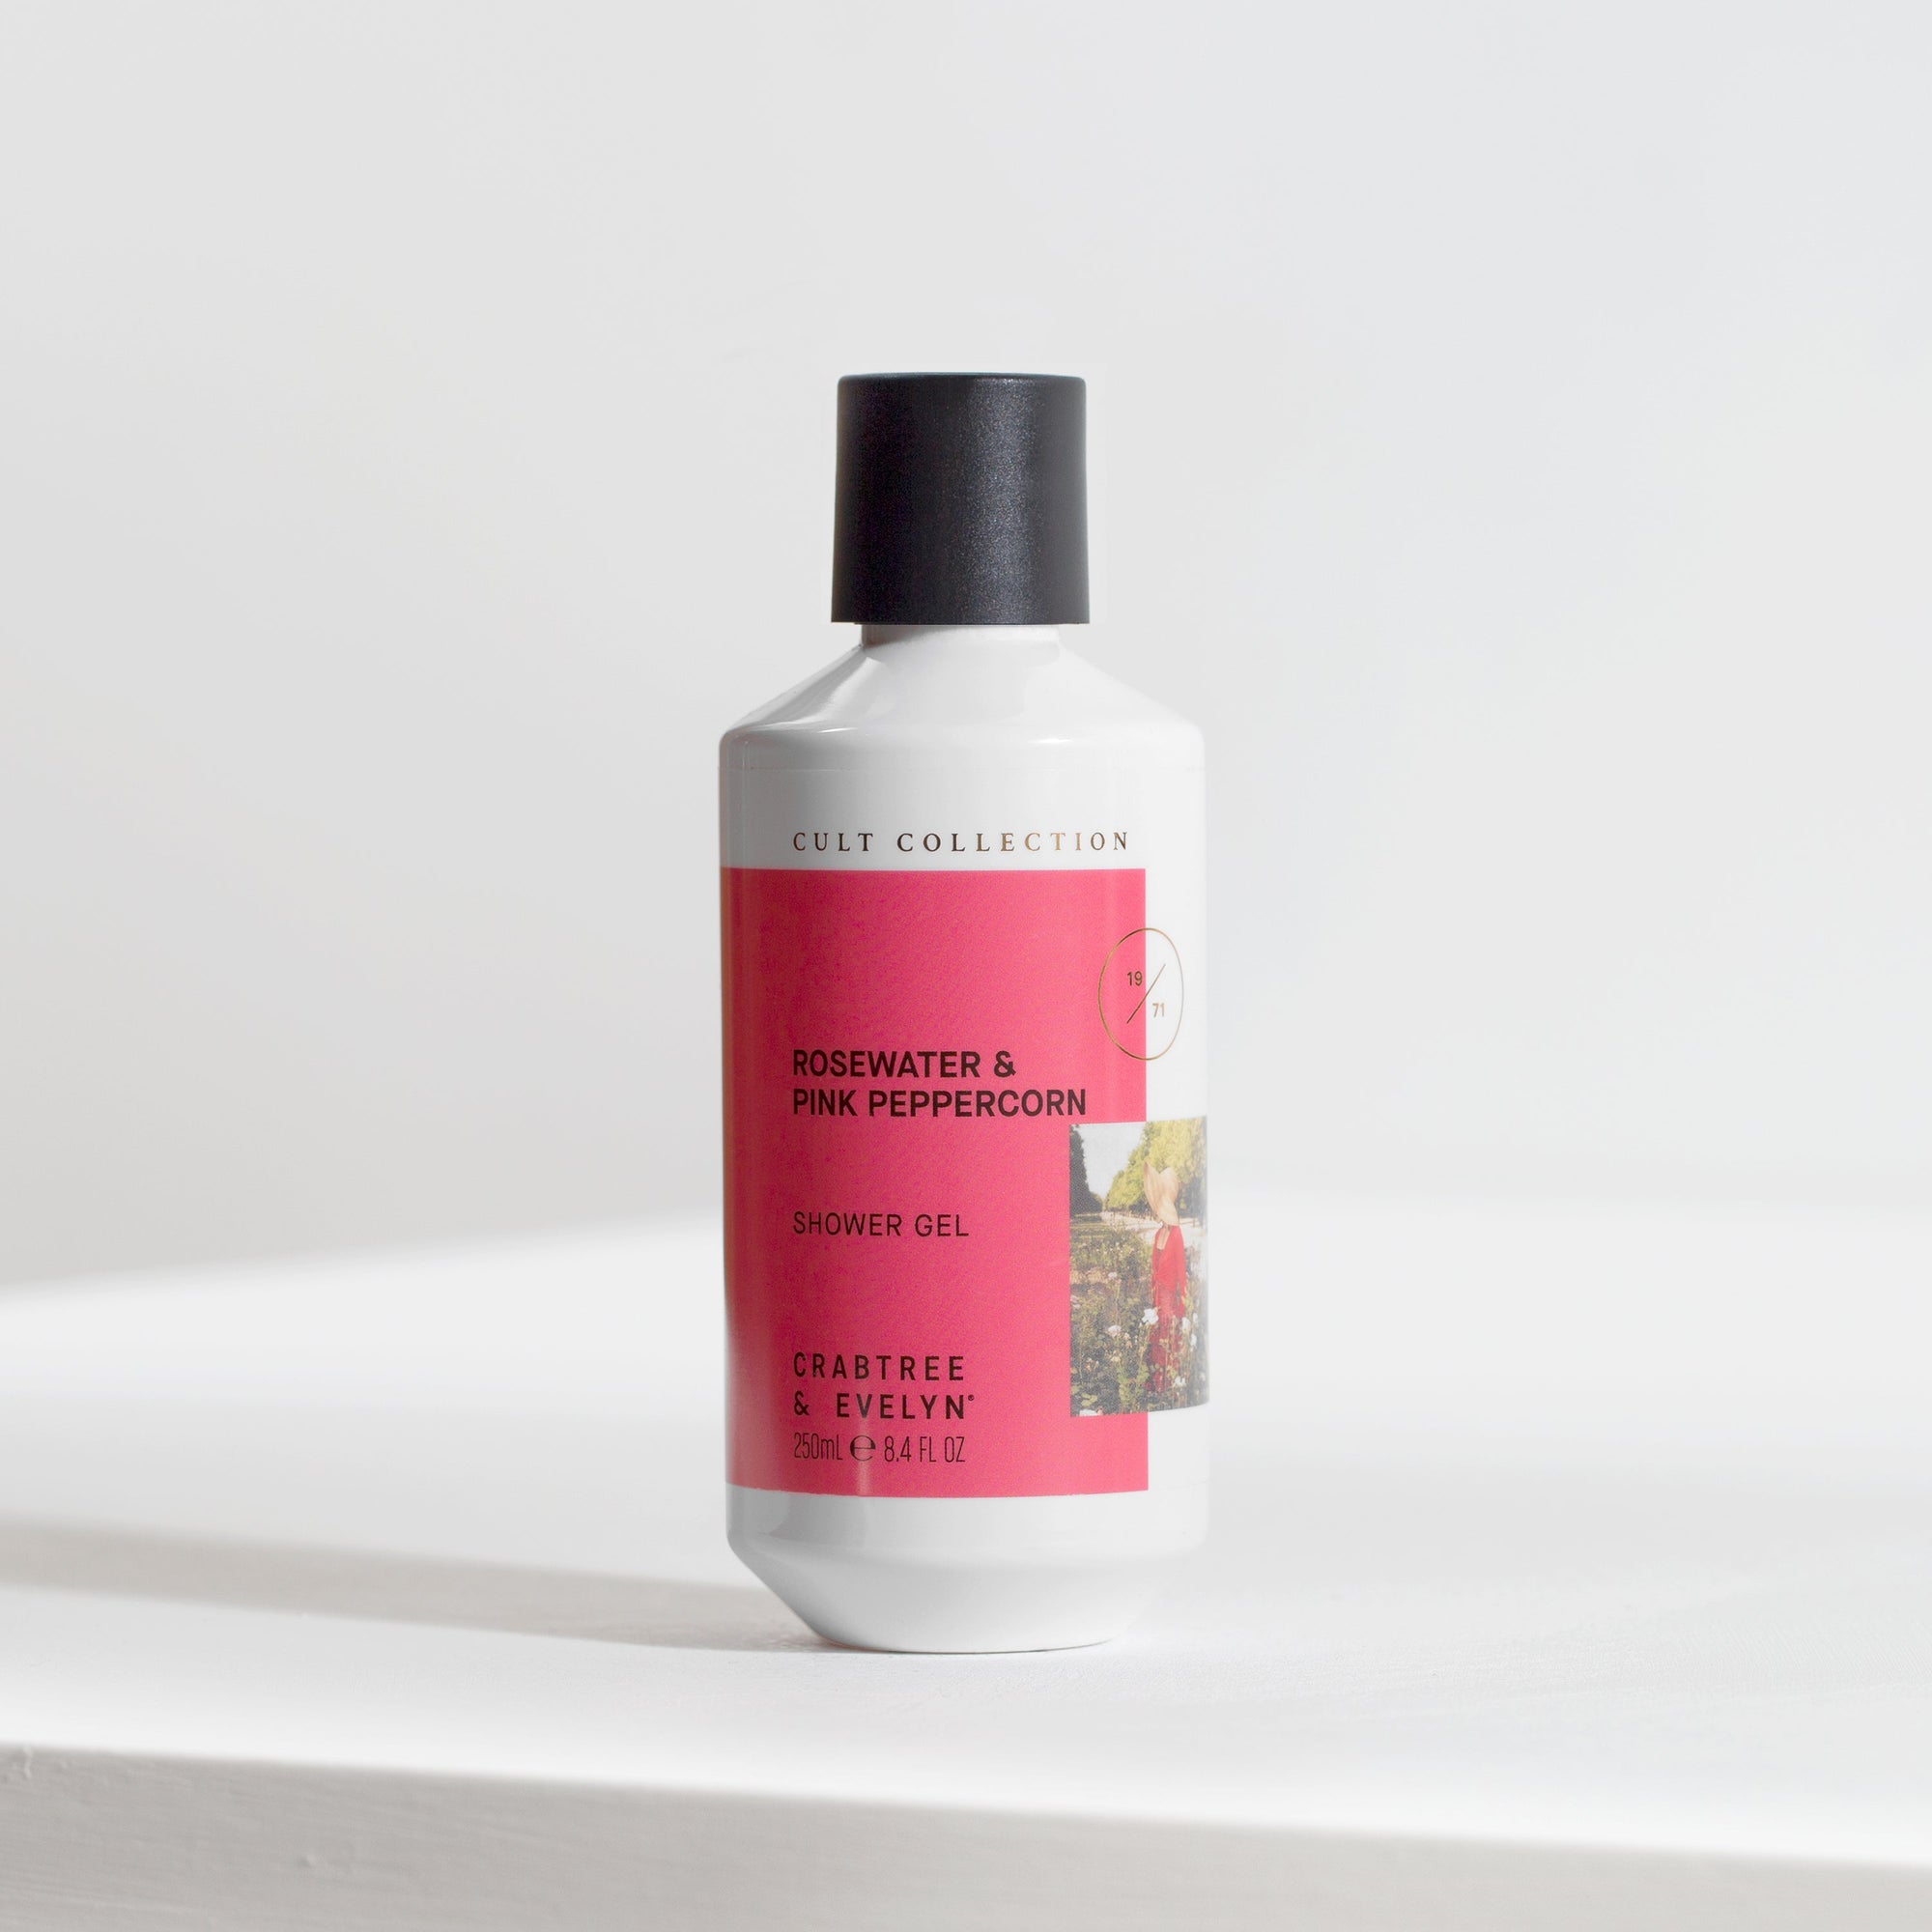 Cult Collection-Rosewater & Pink Peppercorn Shower Gel - 250ml